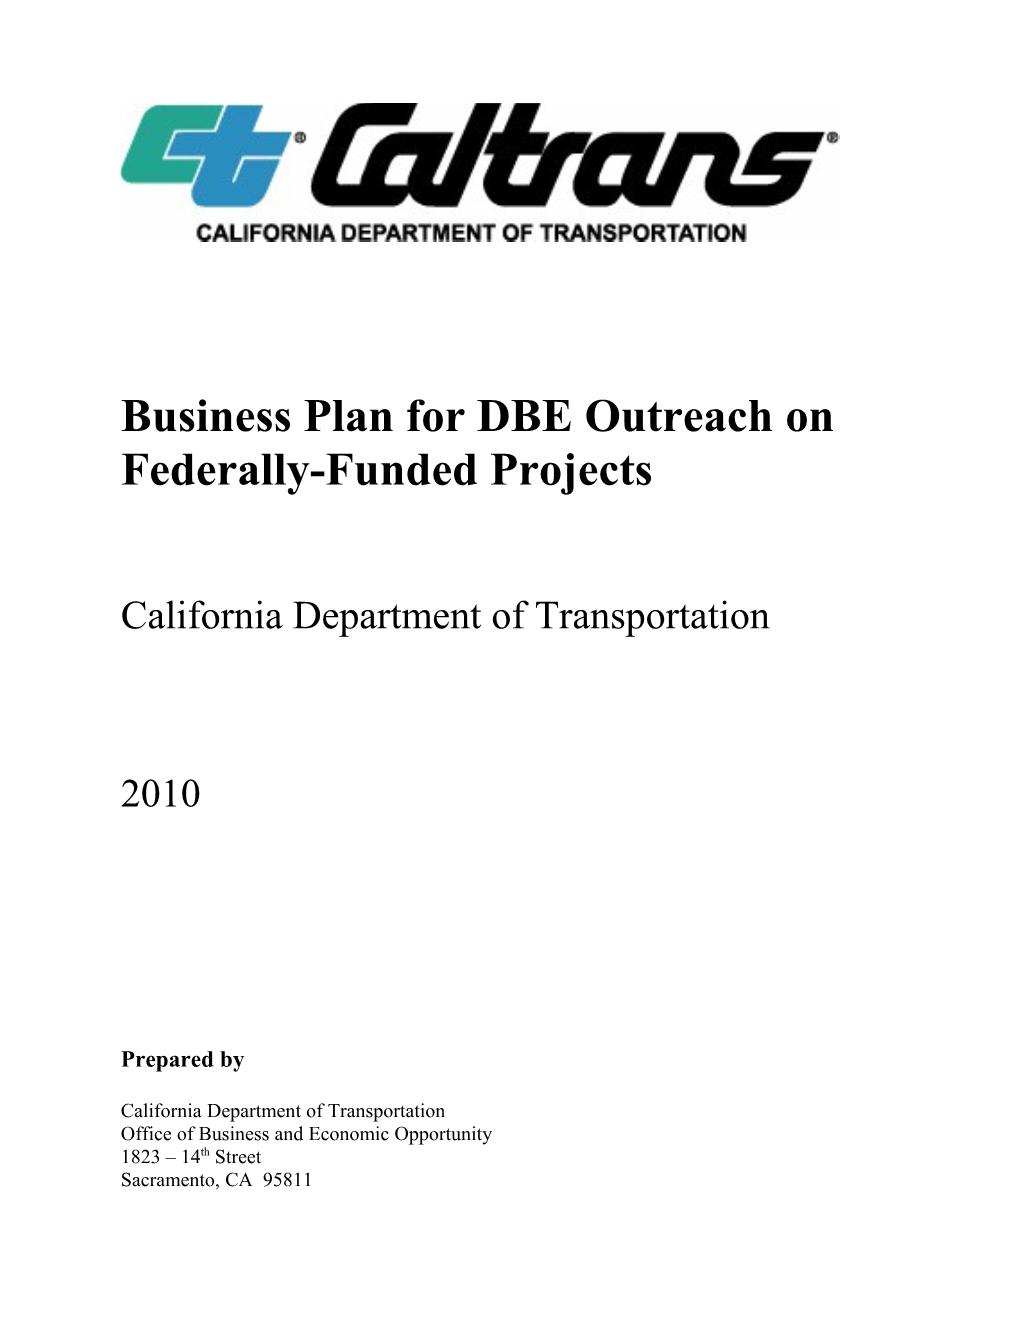 DBE Goals on Federally Funded Projects